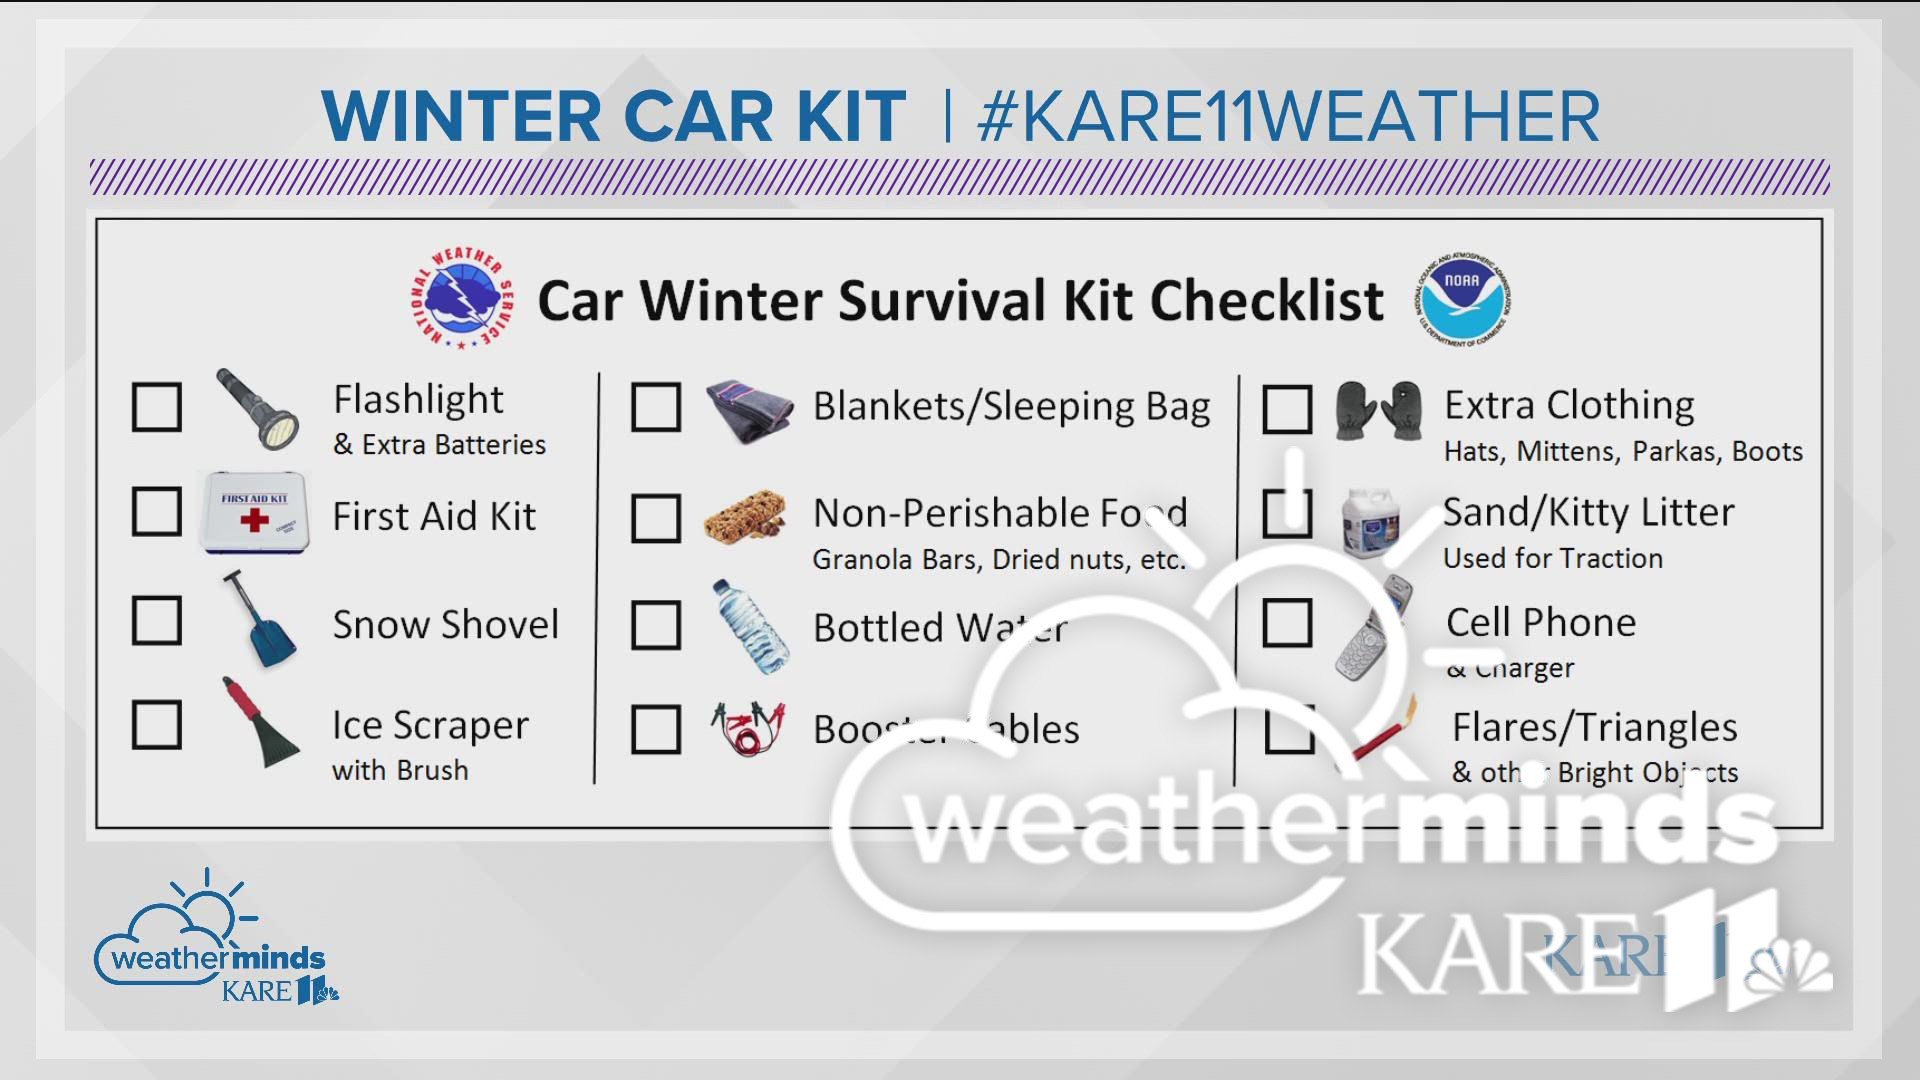 KARE 11 meteorologist Ben Dery breaks down what everyone should have in their vehicles when driving this winter.